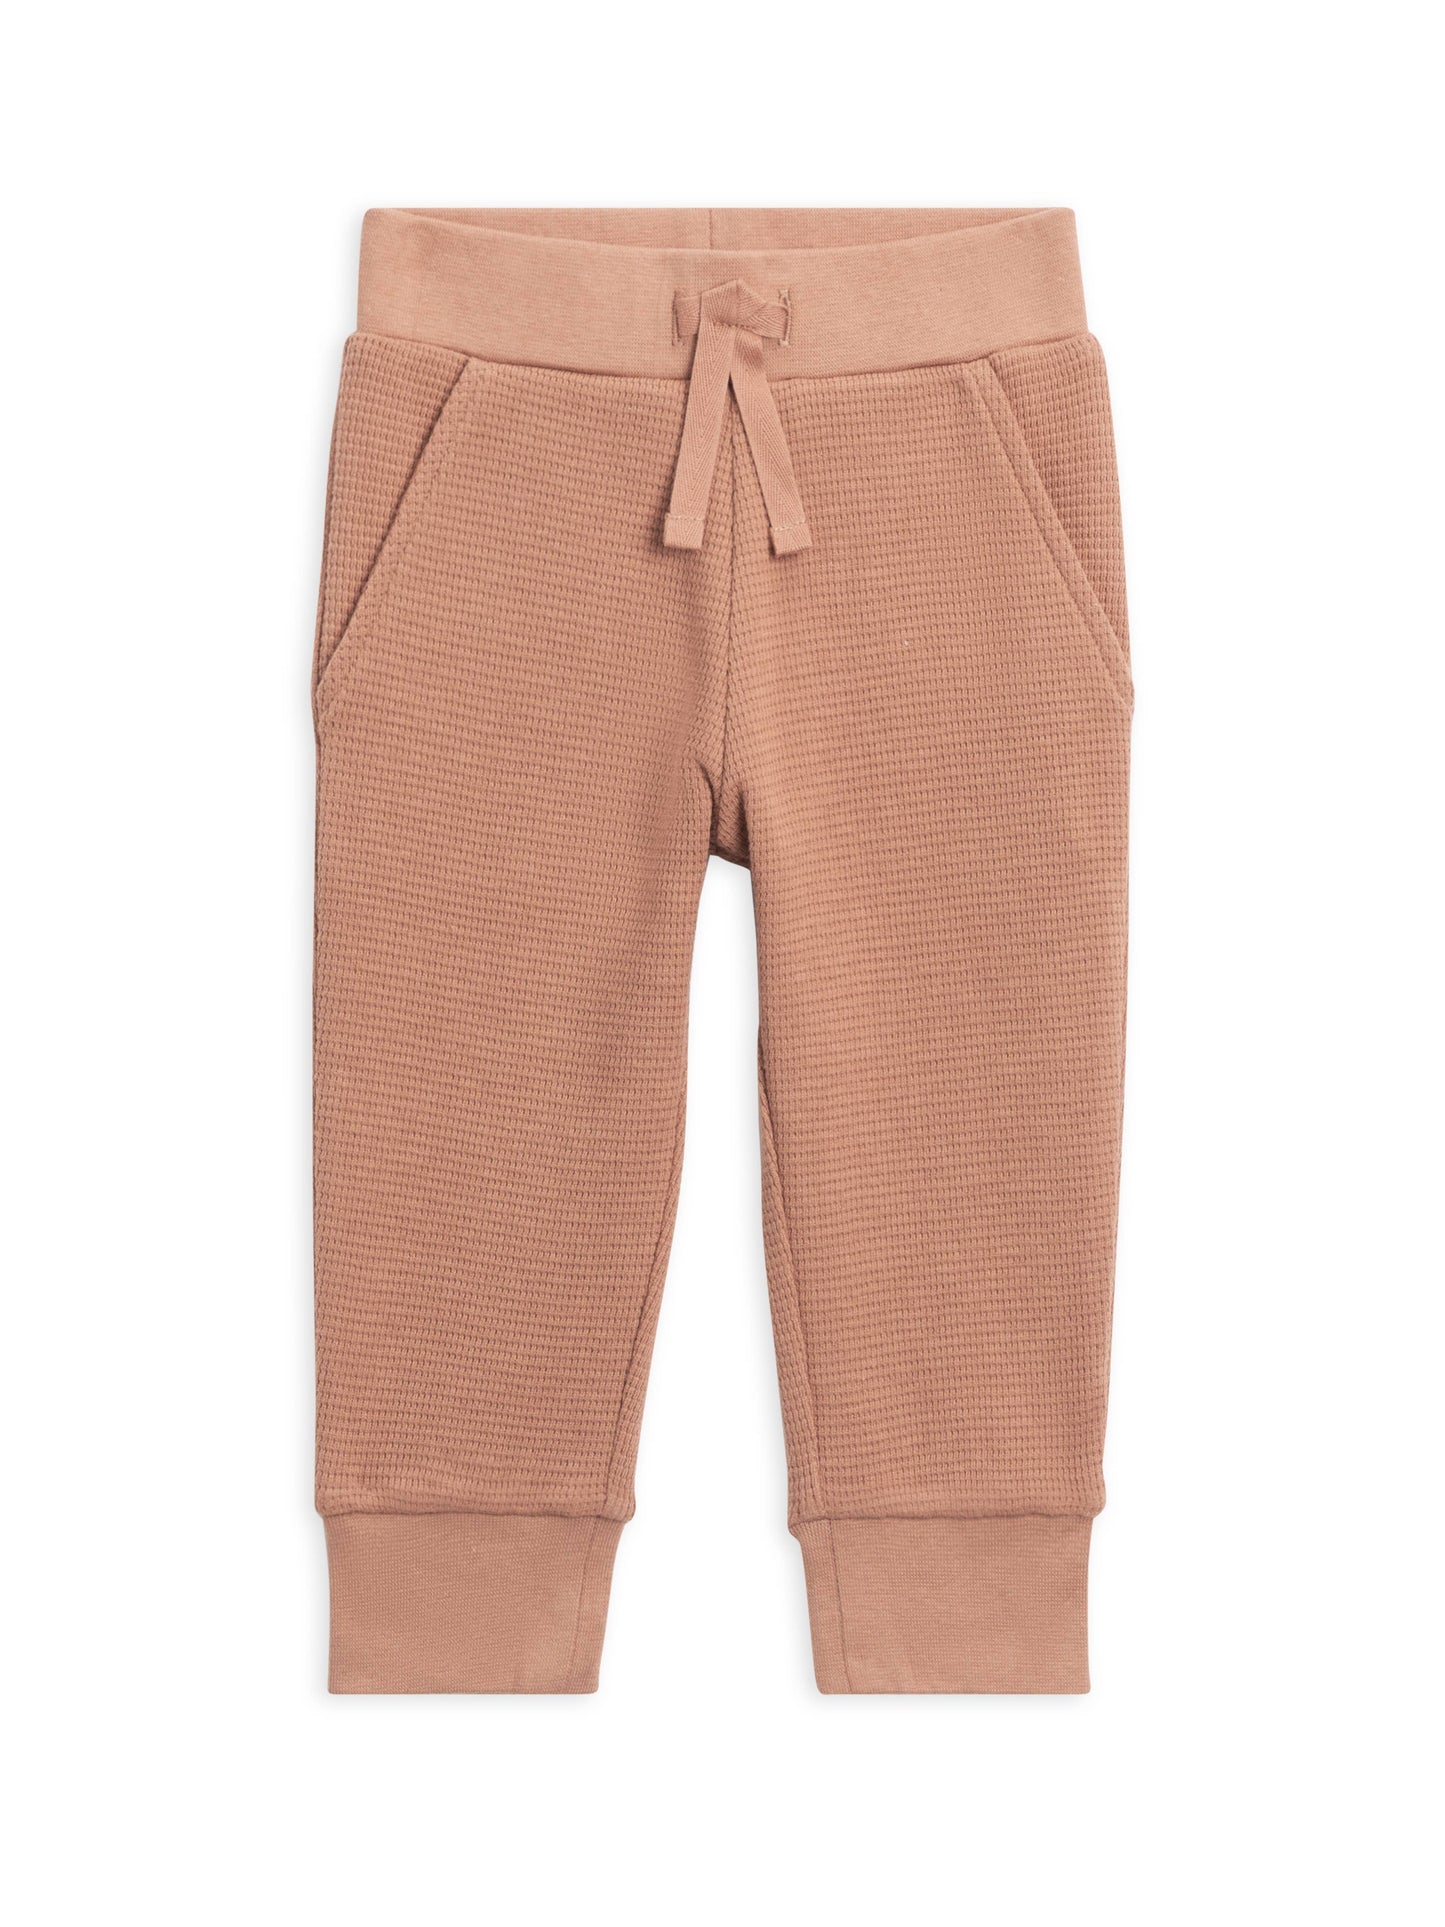 Colored Organics - Organic Baby and Kids Nelson Waffle Knit Jogger - Cider